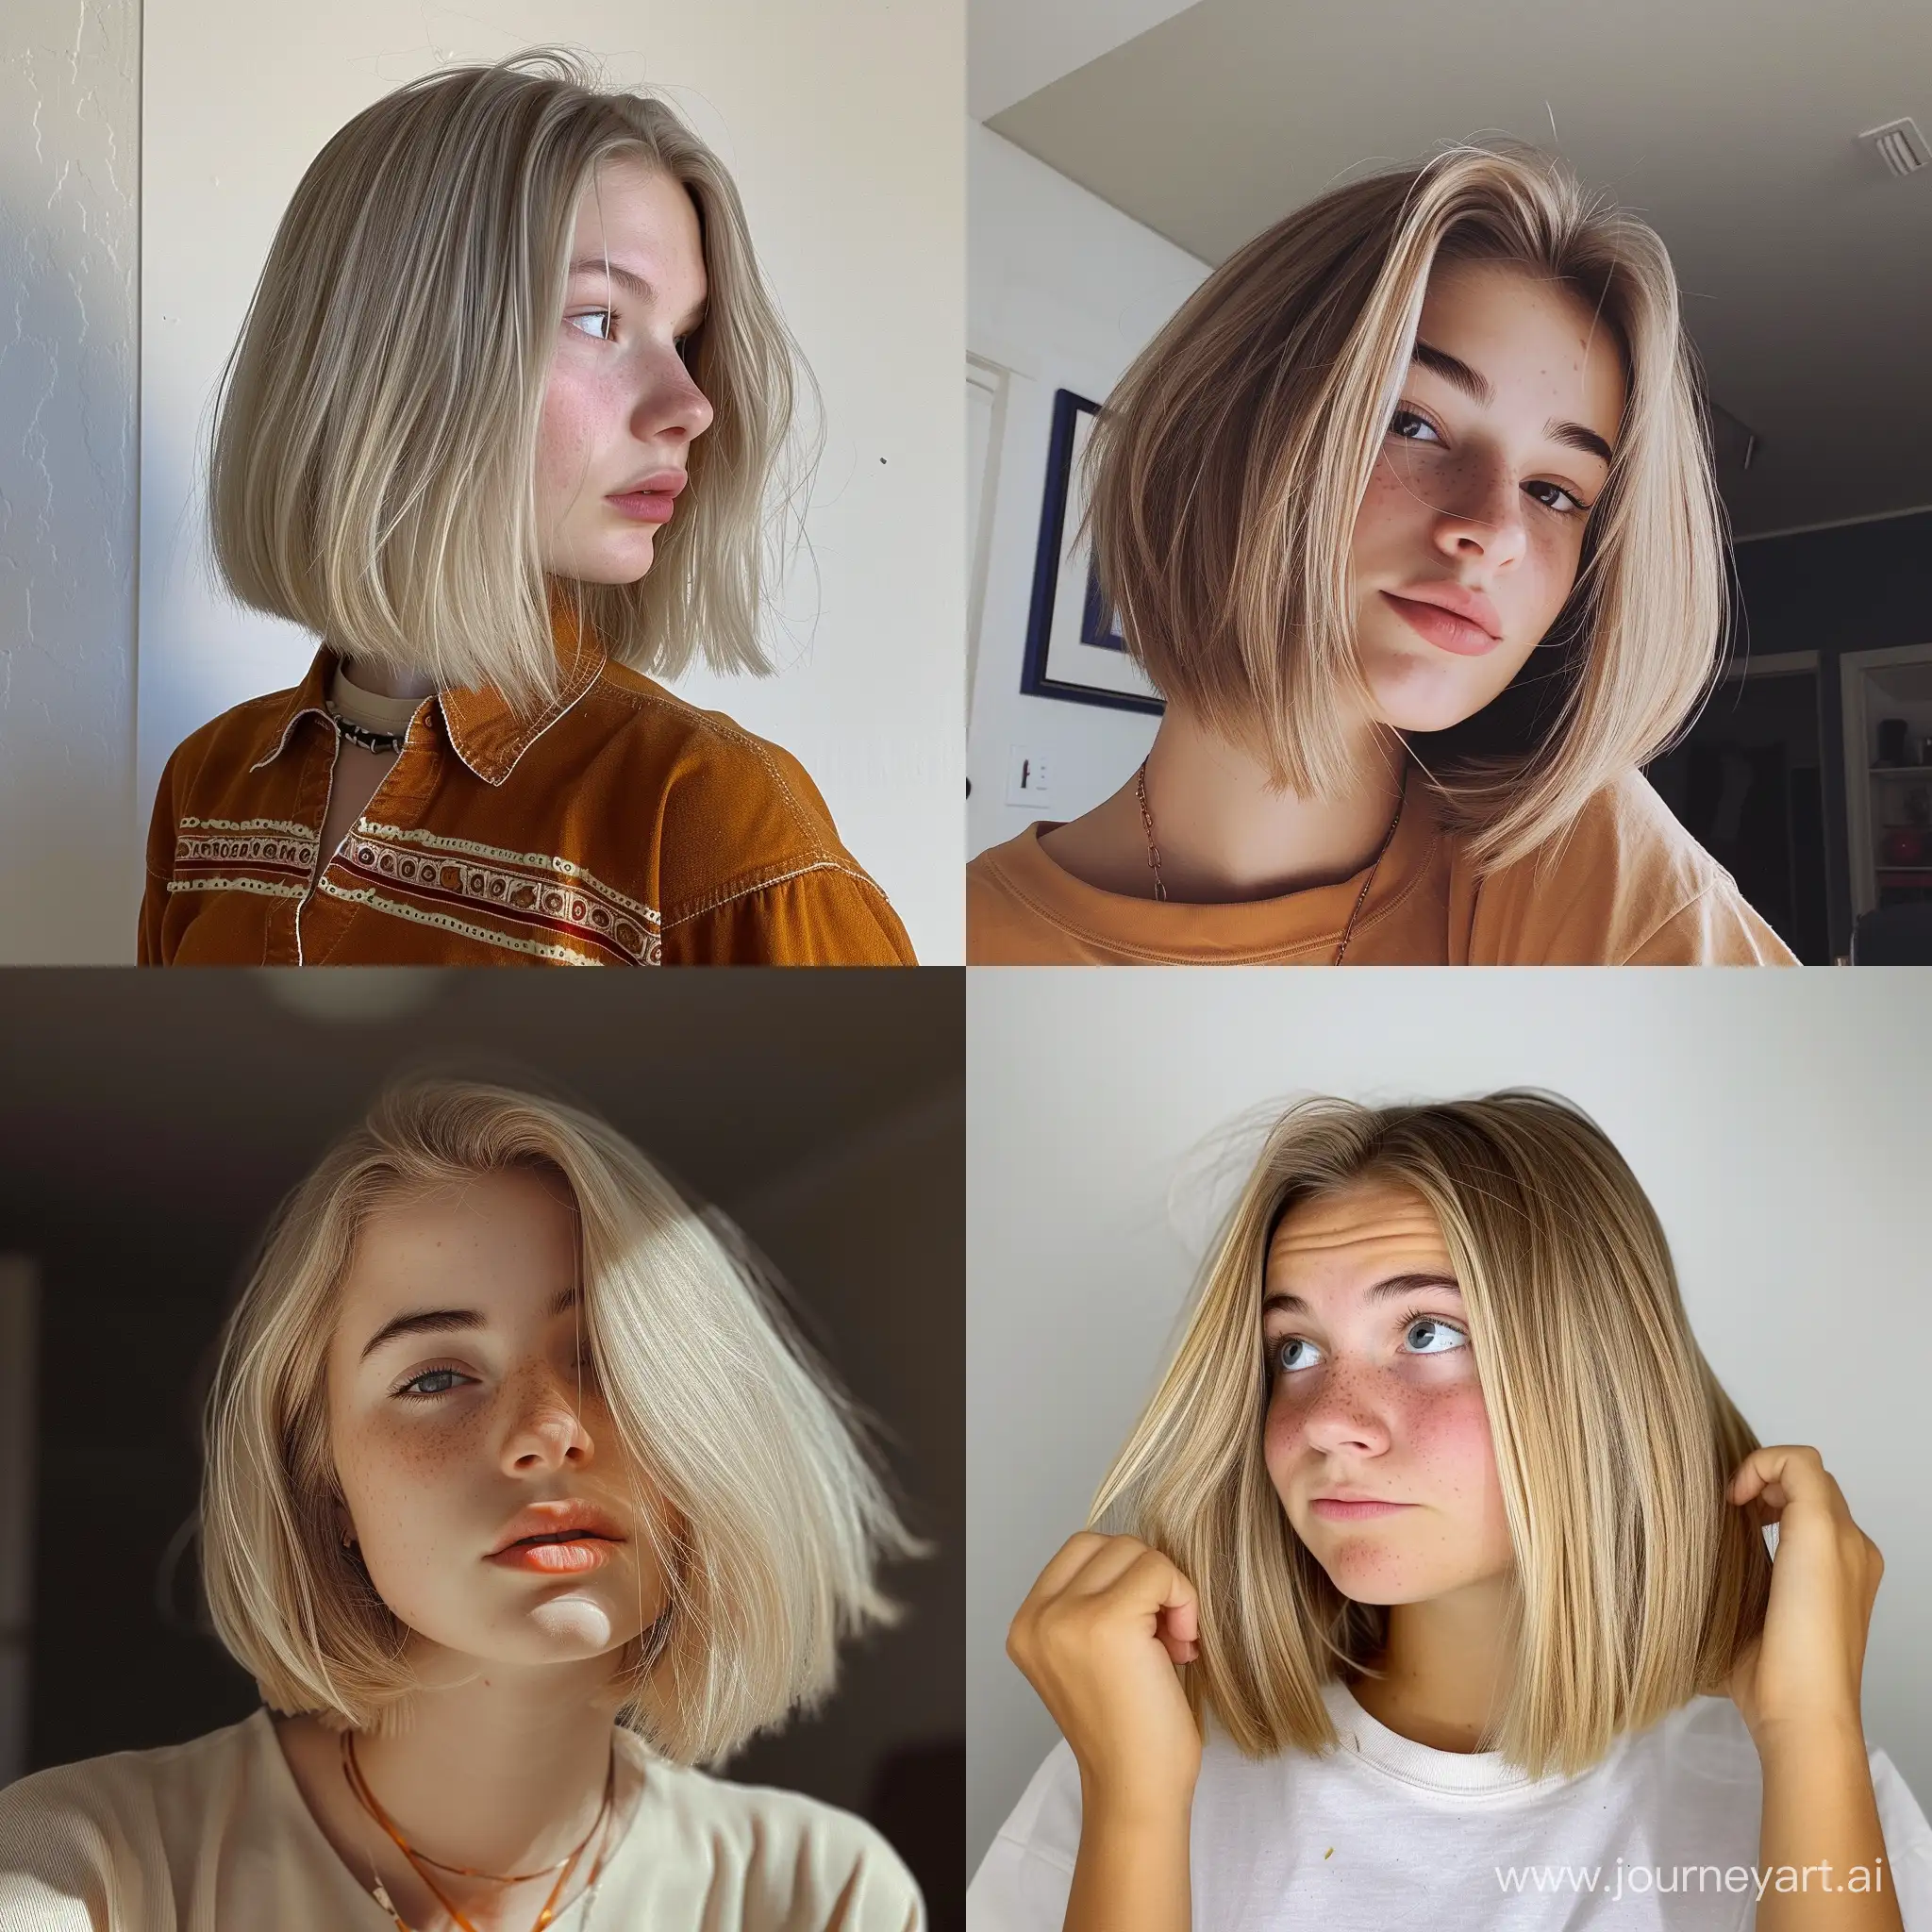 Girl who just had her hair cut from long to bob length, 90s, blonde hair, america, 20 years old, embarrassed but cute